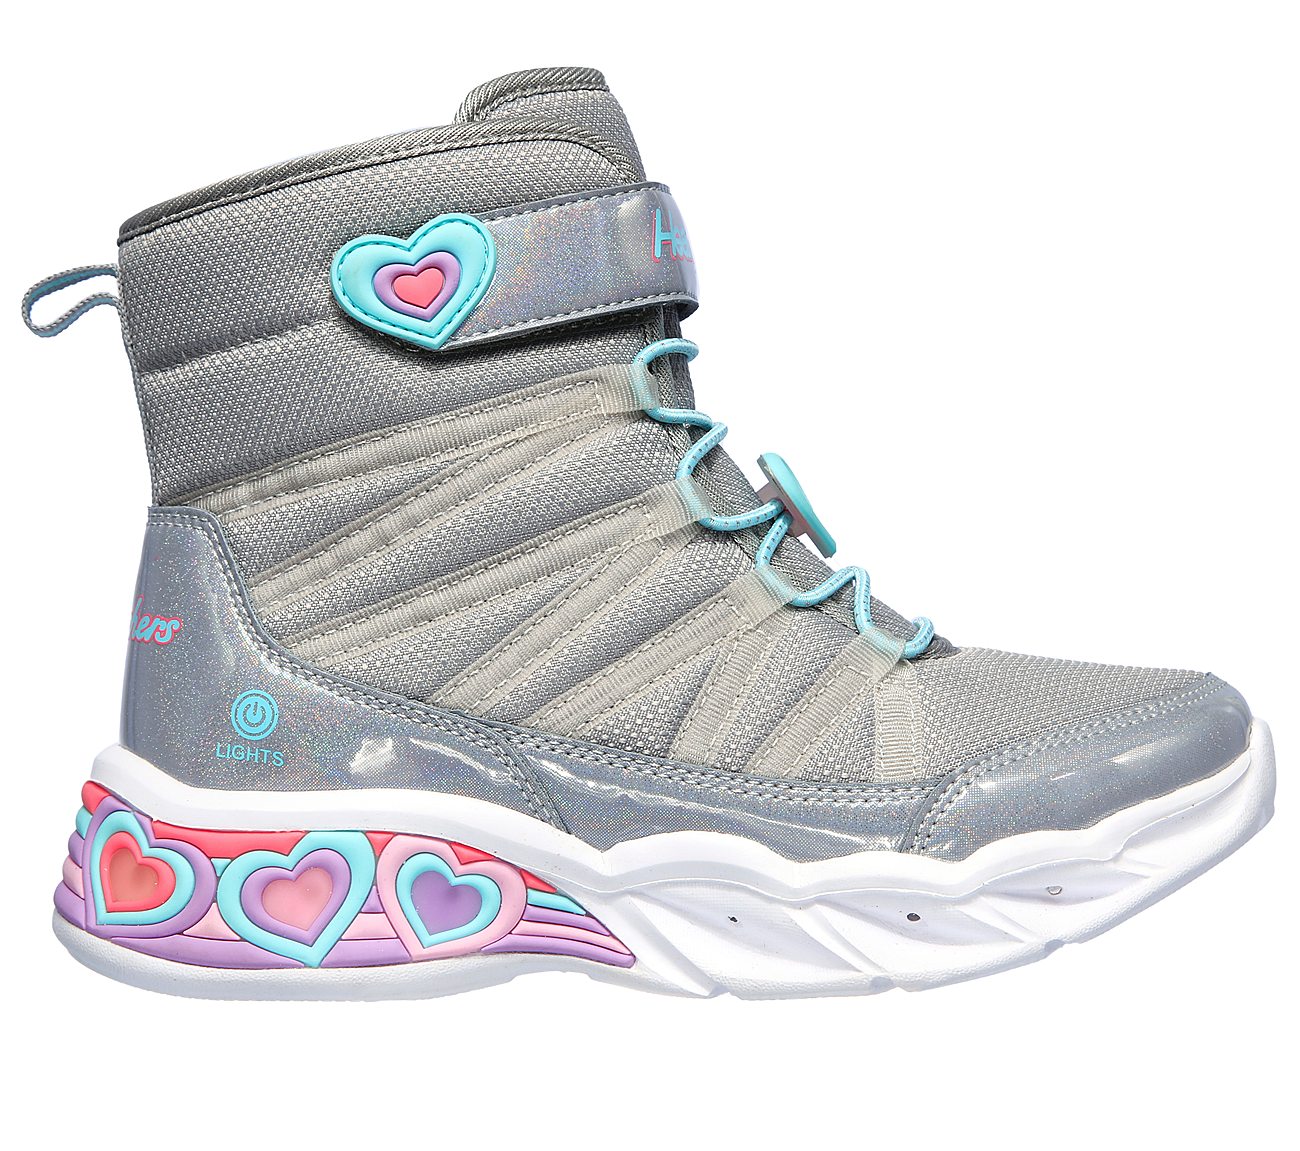 Buy SKECHERS Sweetheart Lights - Love to Shine USA Casuals Shoes